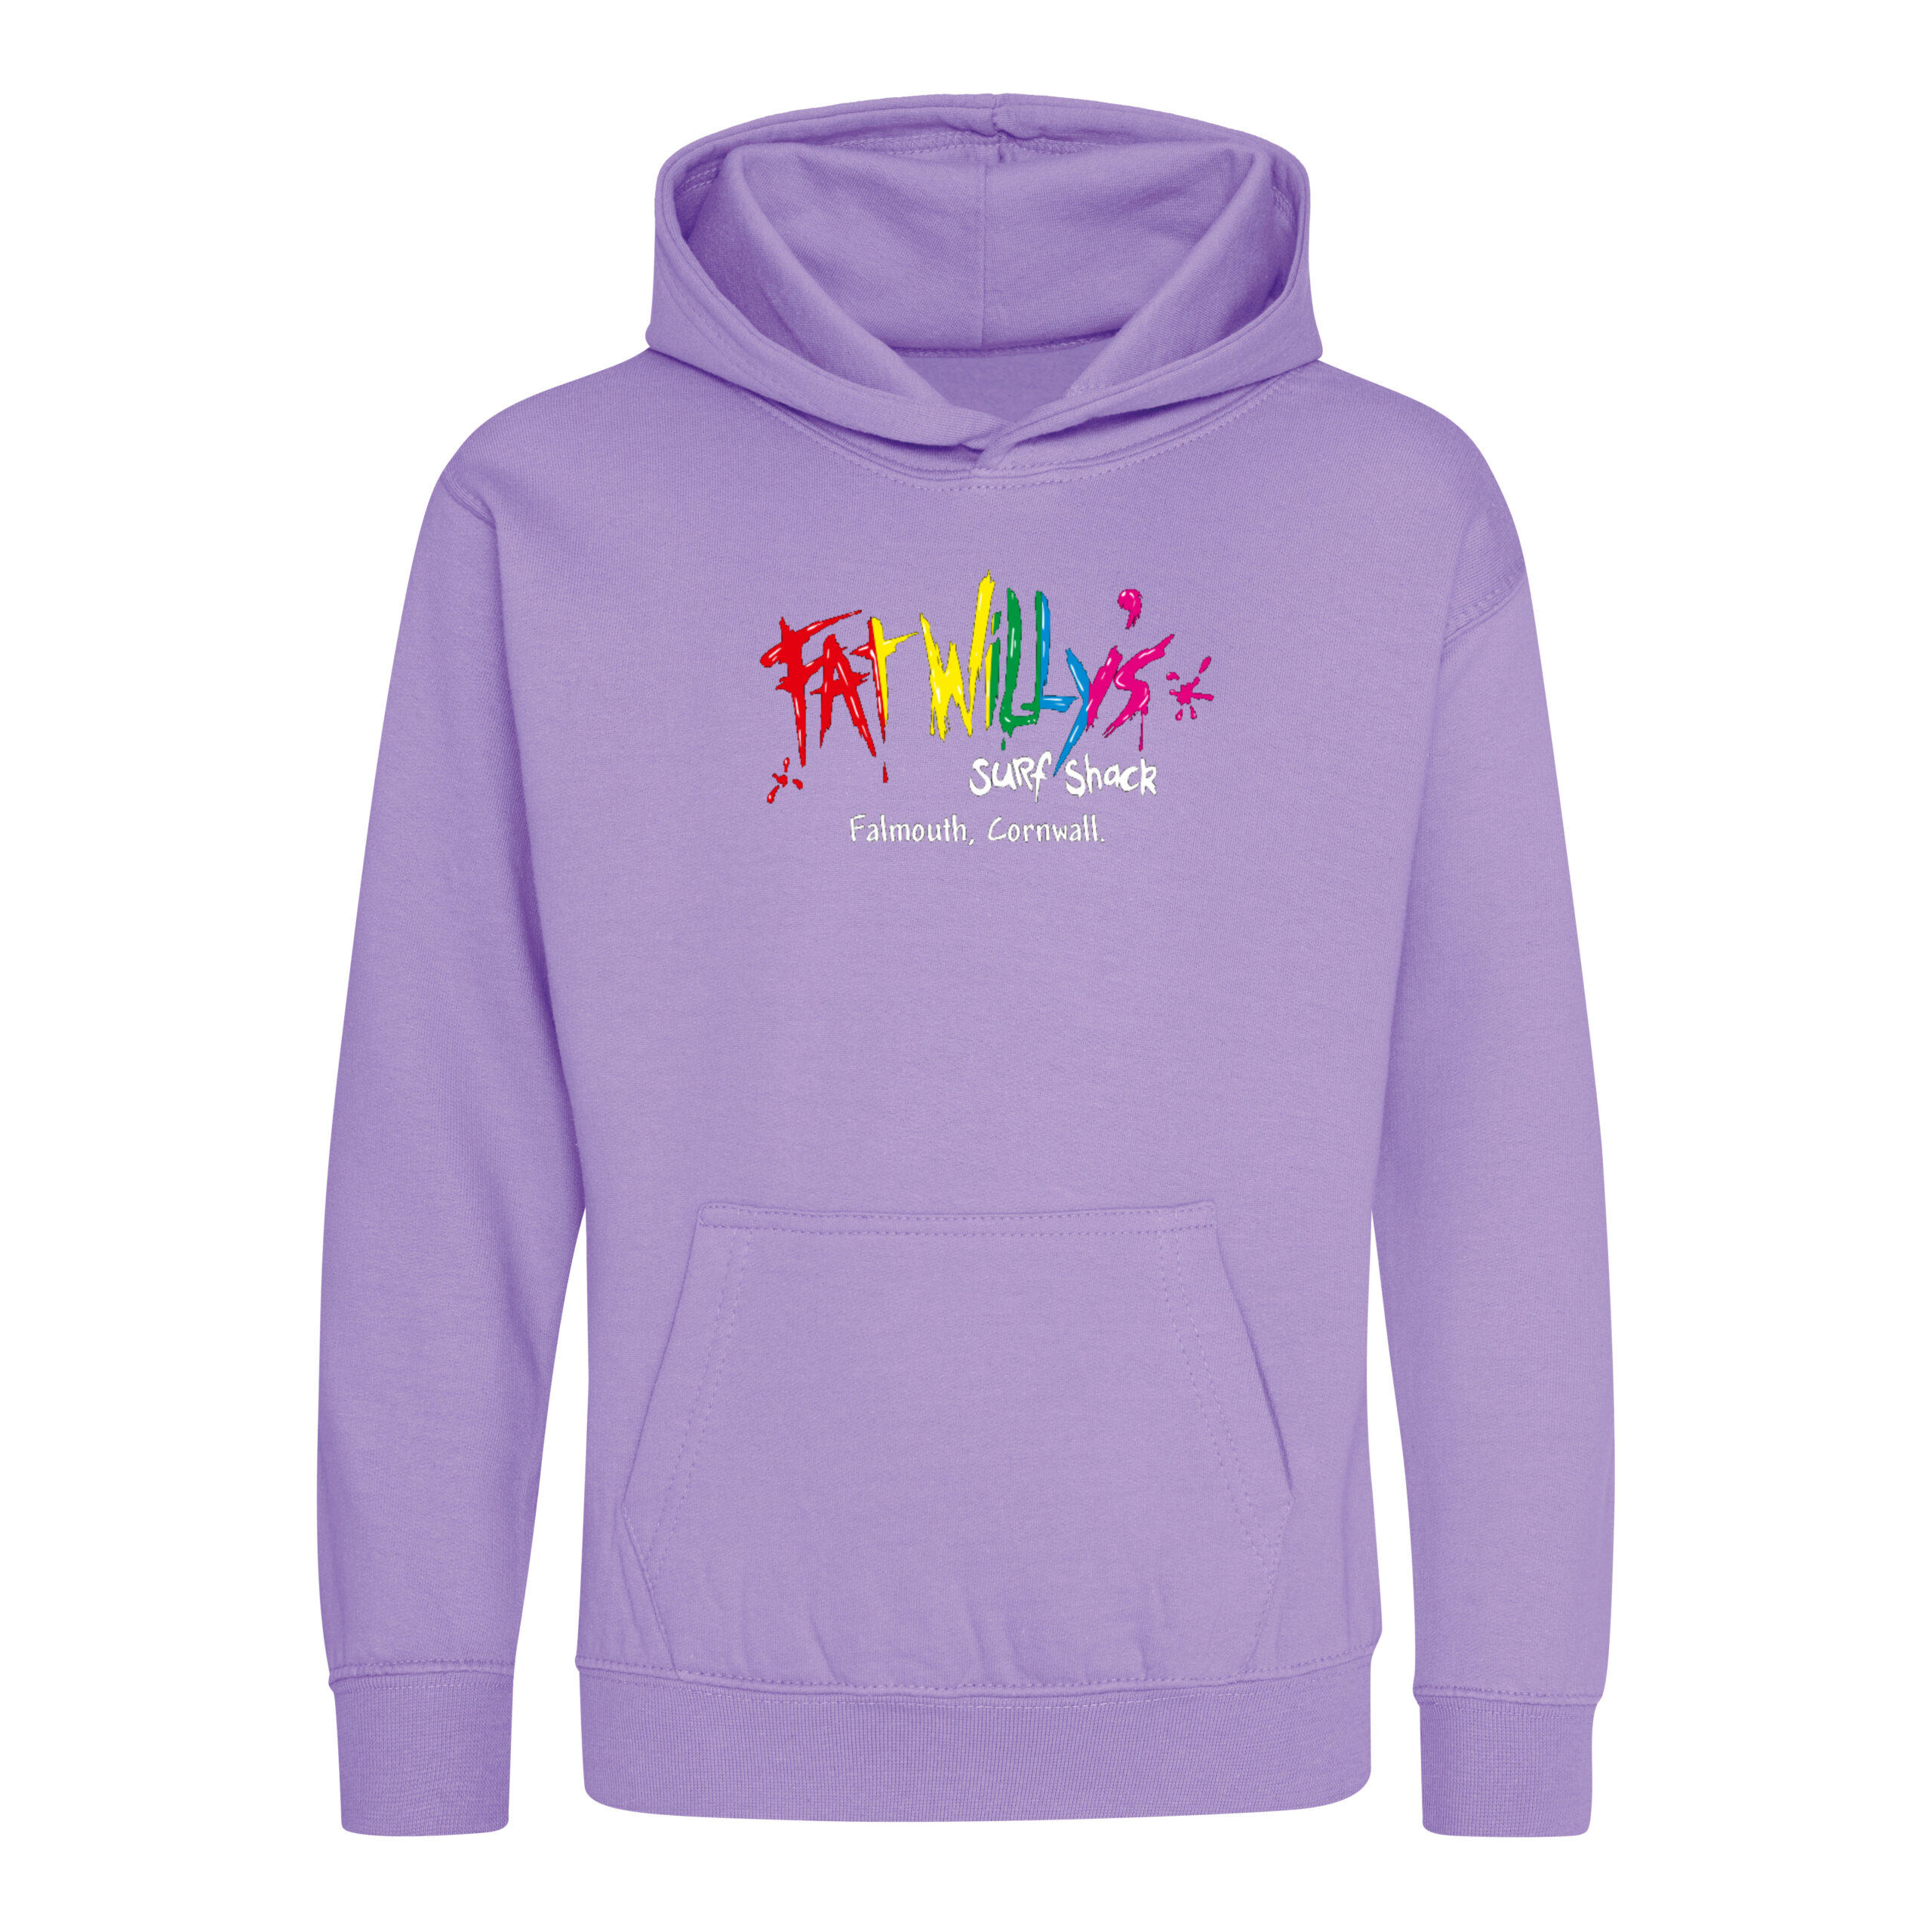 Kids Lavender Hoodie - Fat Willy's - Fat Willy's Cornwall:Cornish surf